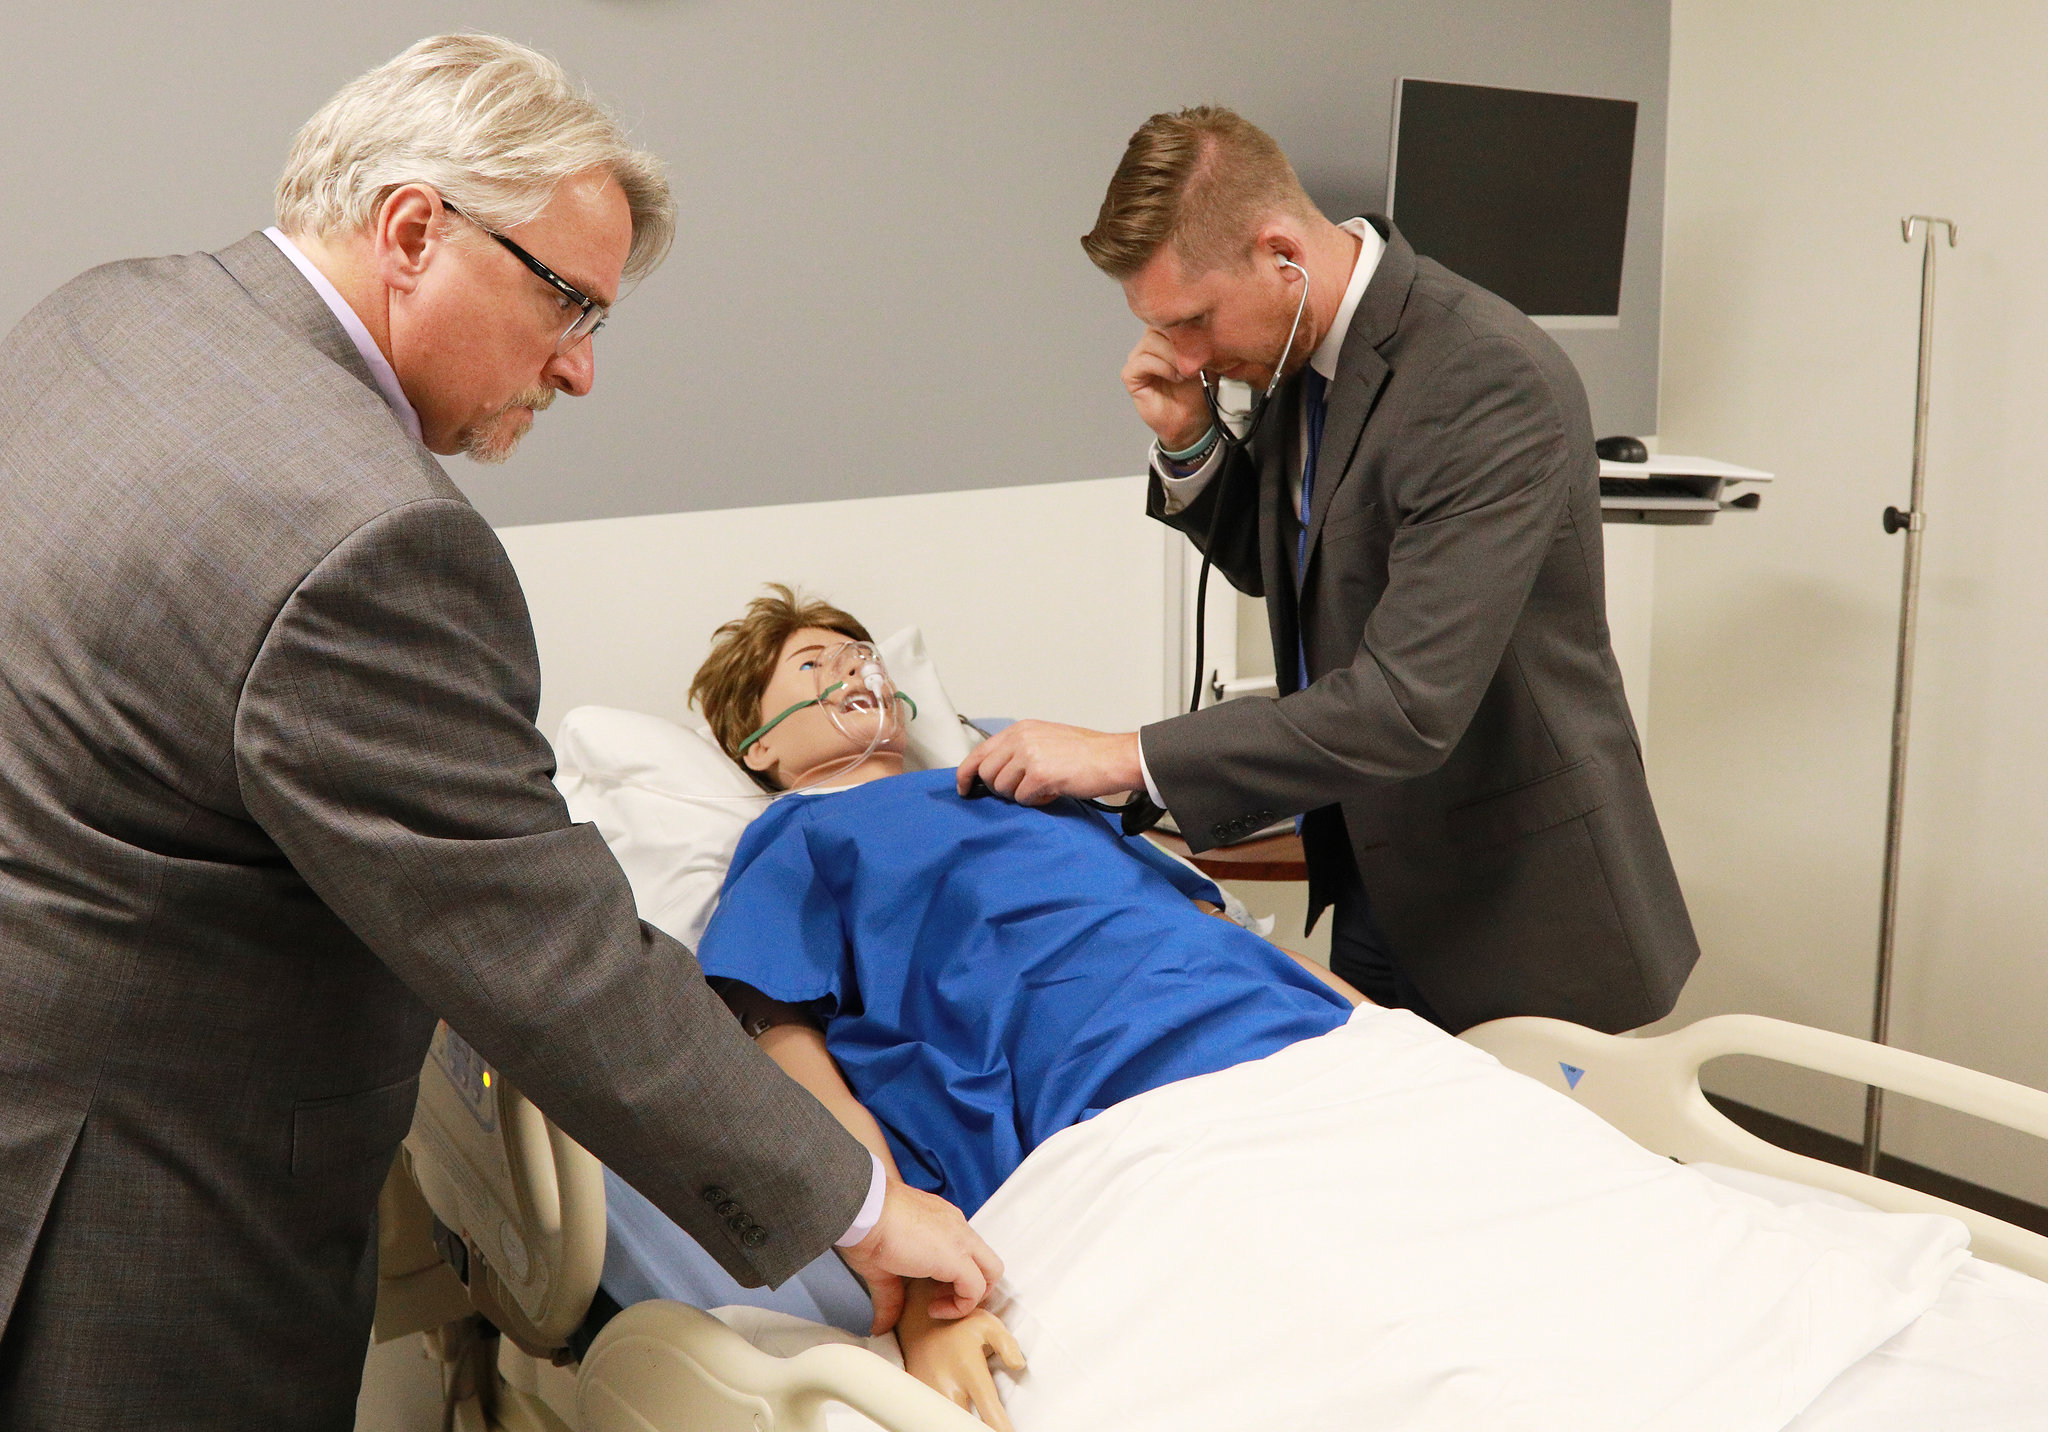 Two men in suits practicing care on a mannequin in a hospital bed